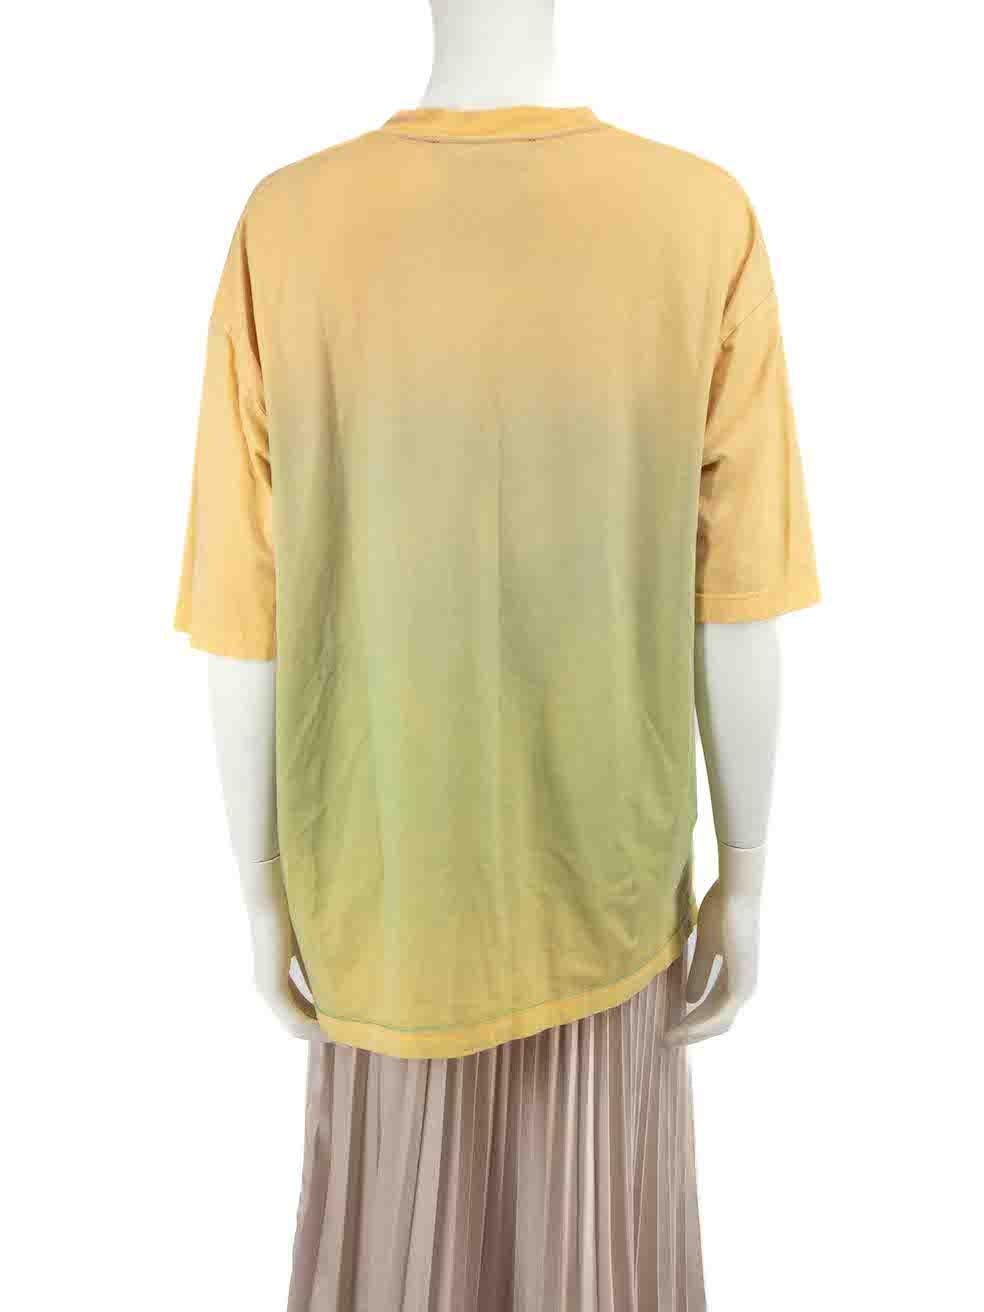 Acne Studios Yellow Oversized Printed T-Shirt Size XS In Good Condition For Sale In London, GB